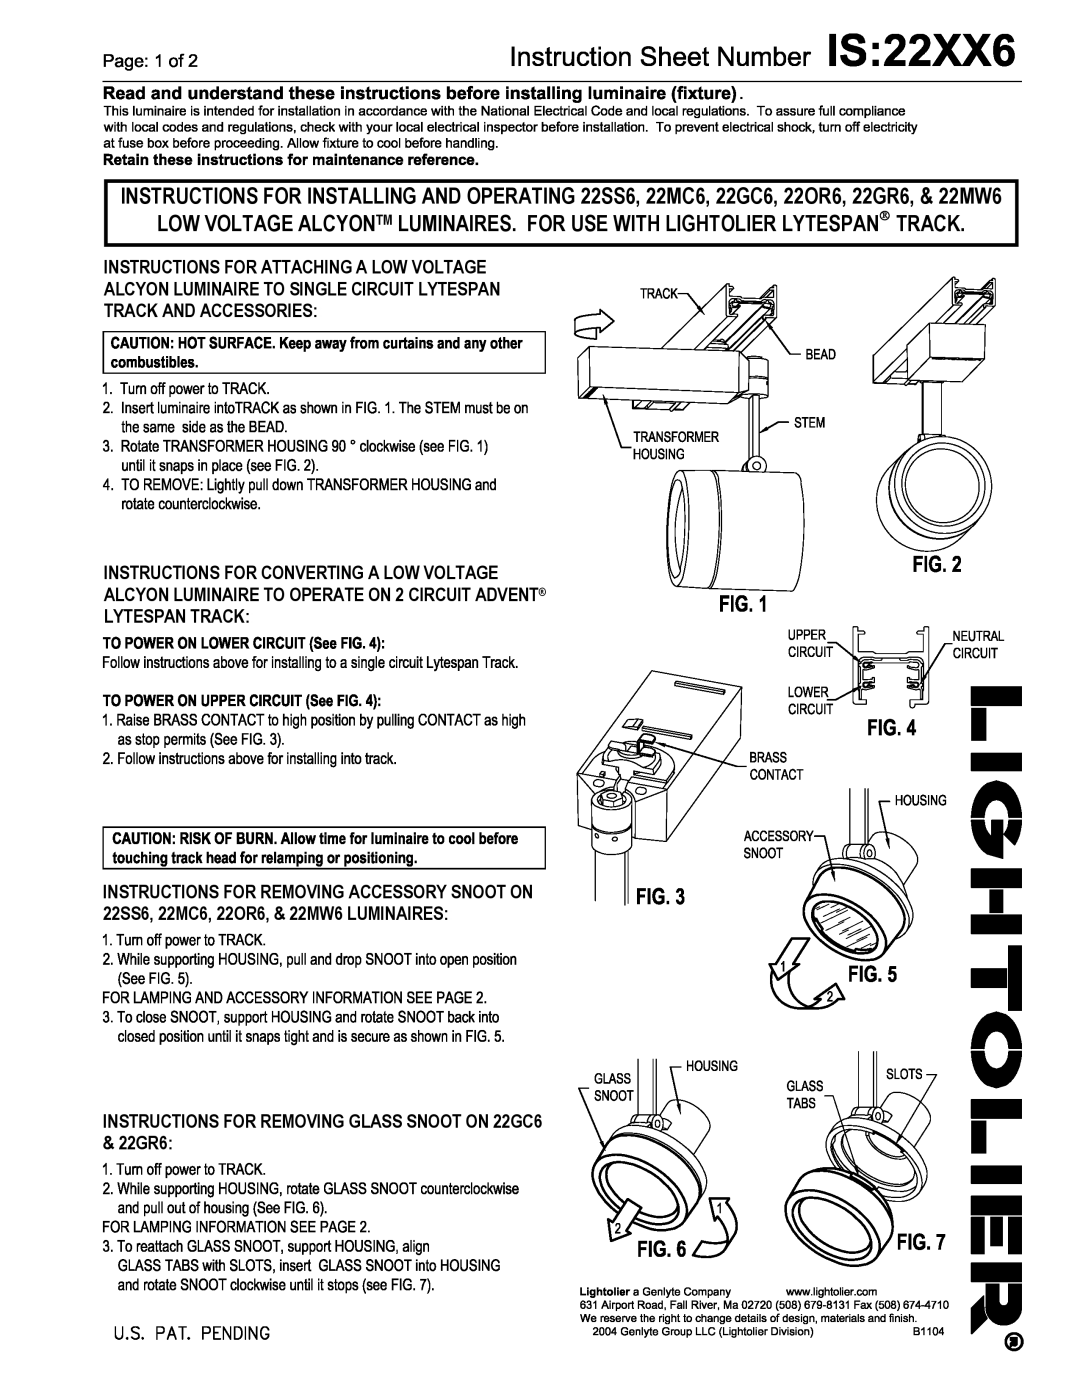 Lightolier 22XX6 manual Instructions For Attaching A Low Voltage 